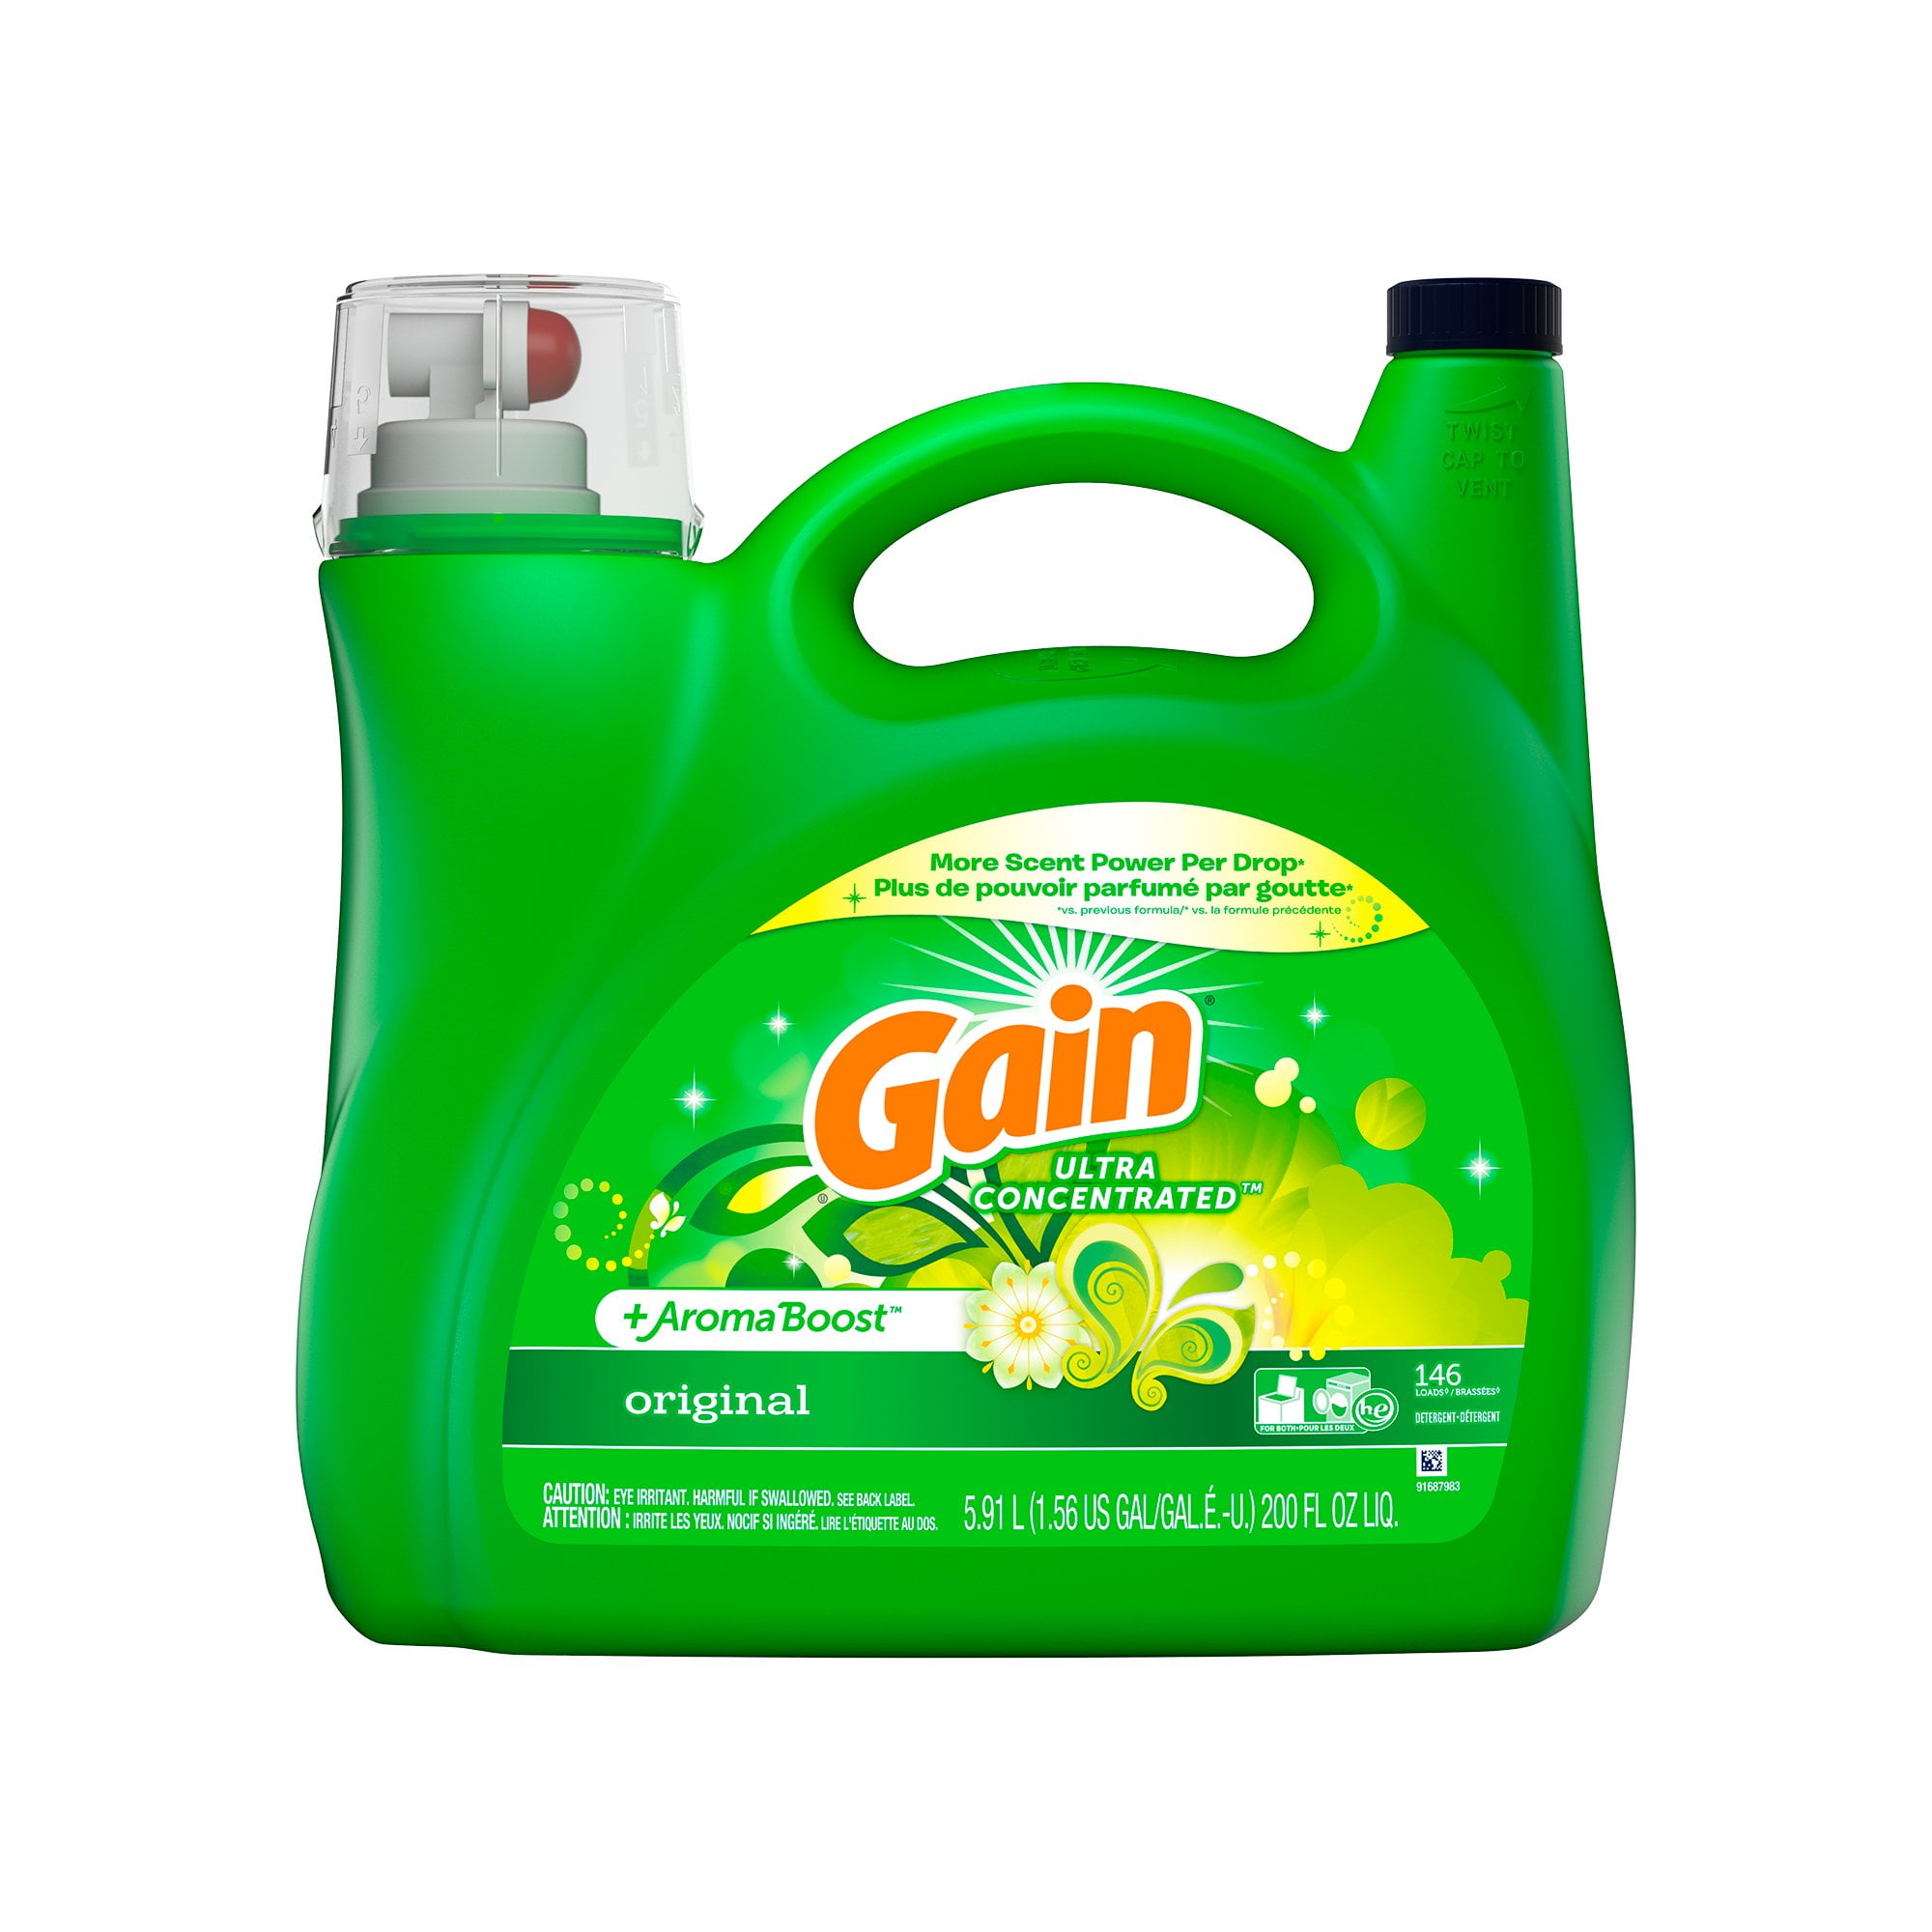 Branded Gain +AromaBoost Ultra Concentrated Liquid Laundry Detergent, Original, (146 lds, 200 oz.) Pack of 1